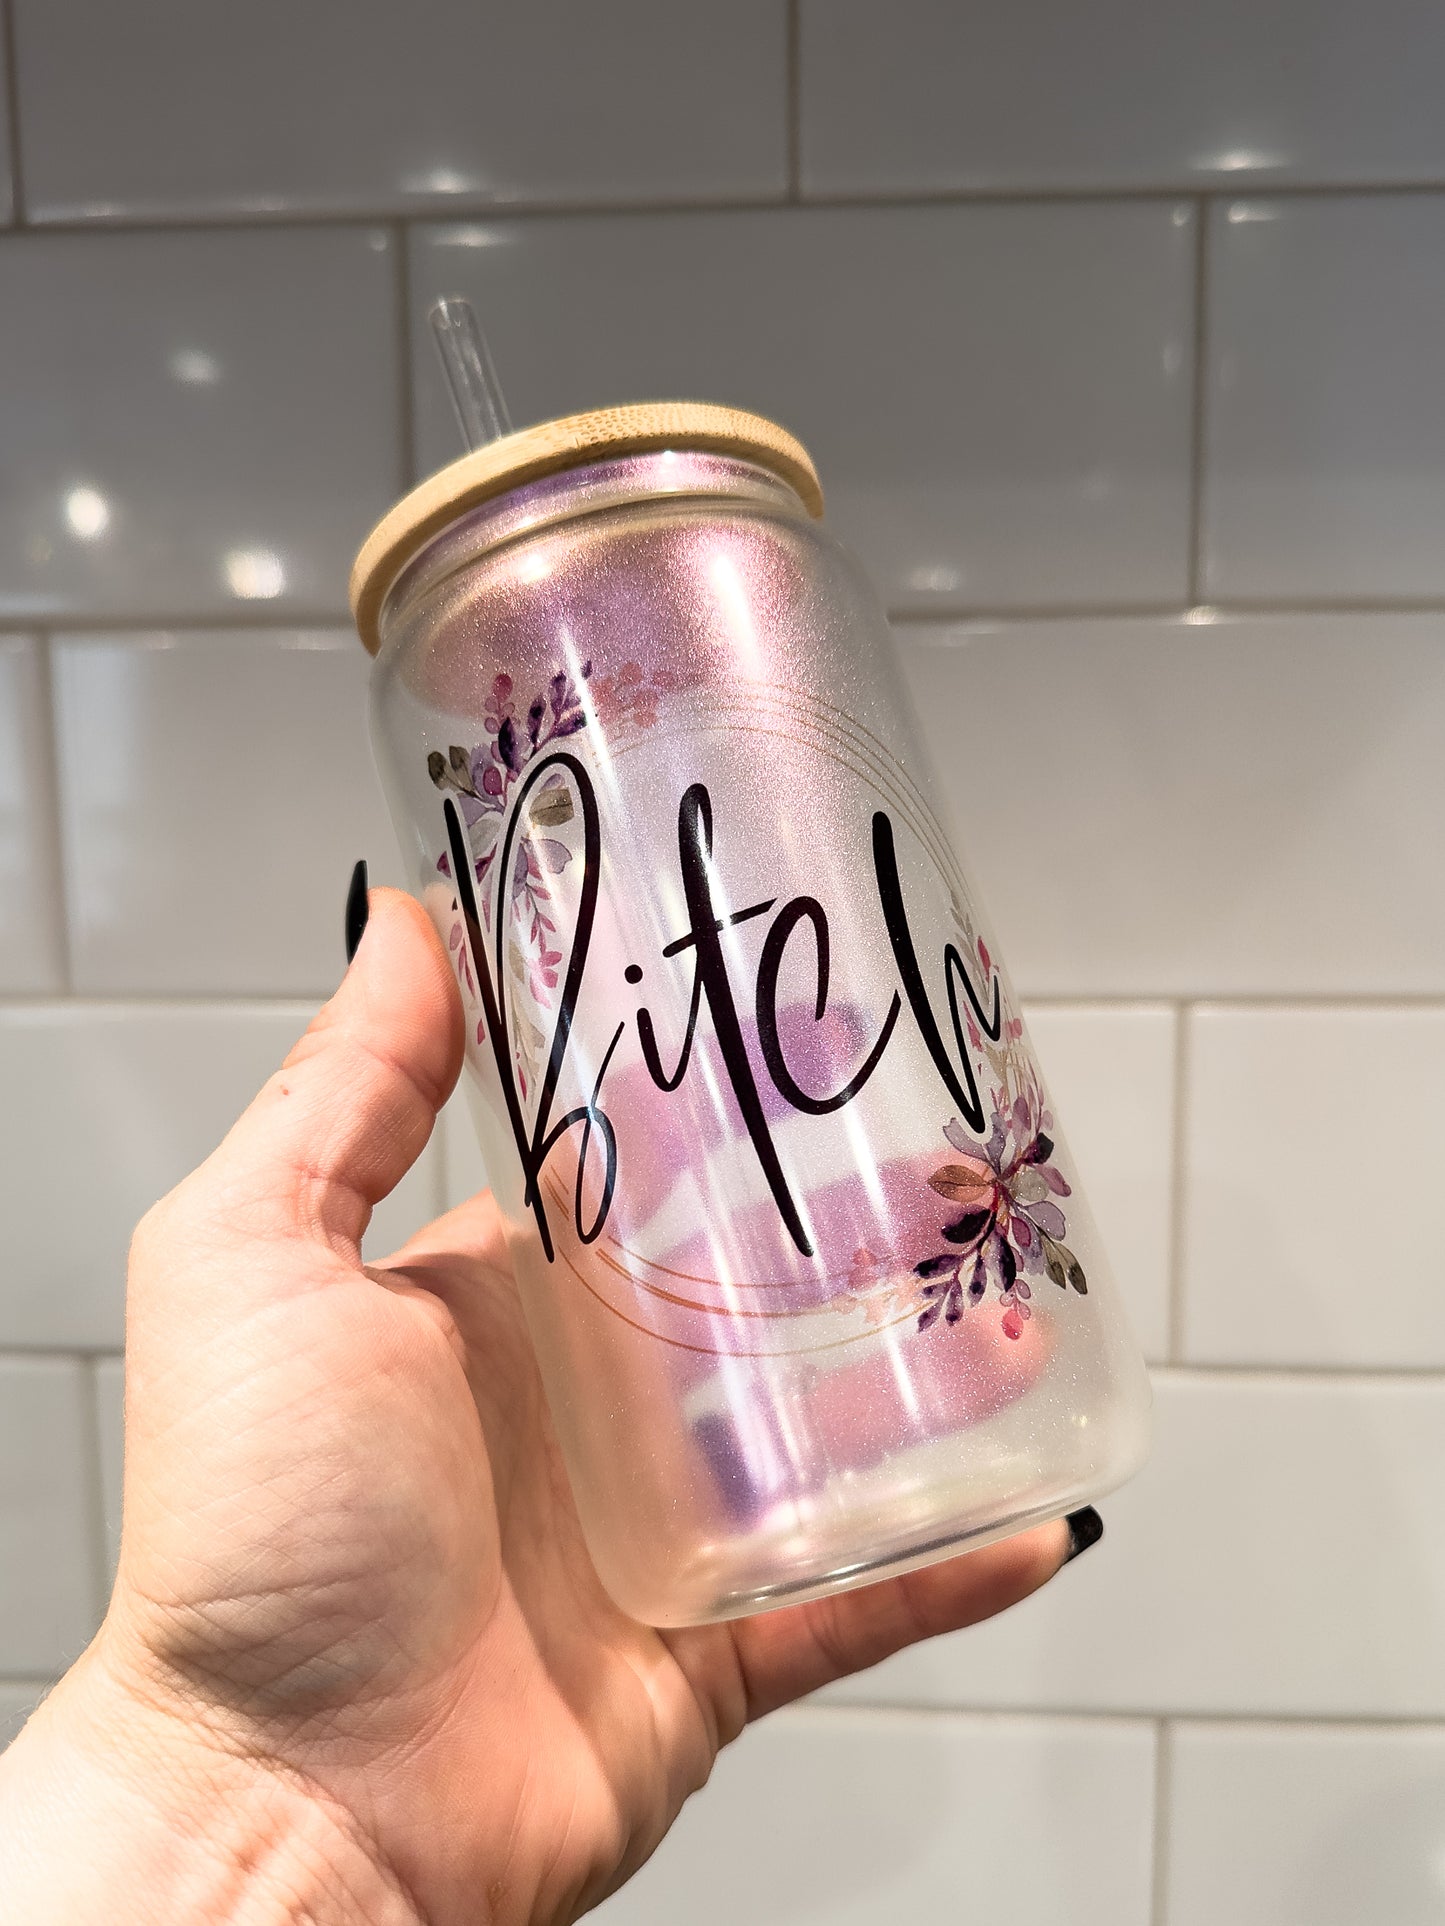 B!tch | Sweary | 16 oz Can Glass with Bamboo Lid | Purple Iridescent | Glass Drinkware